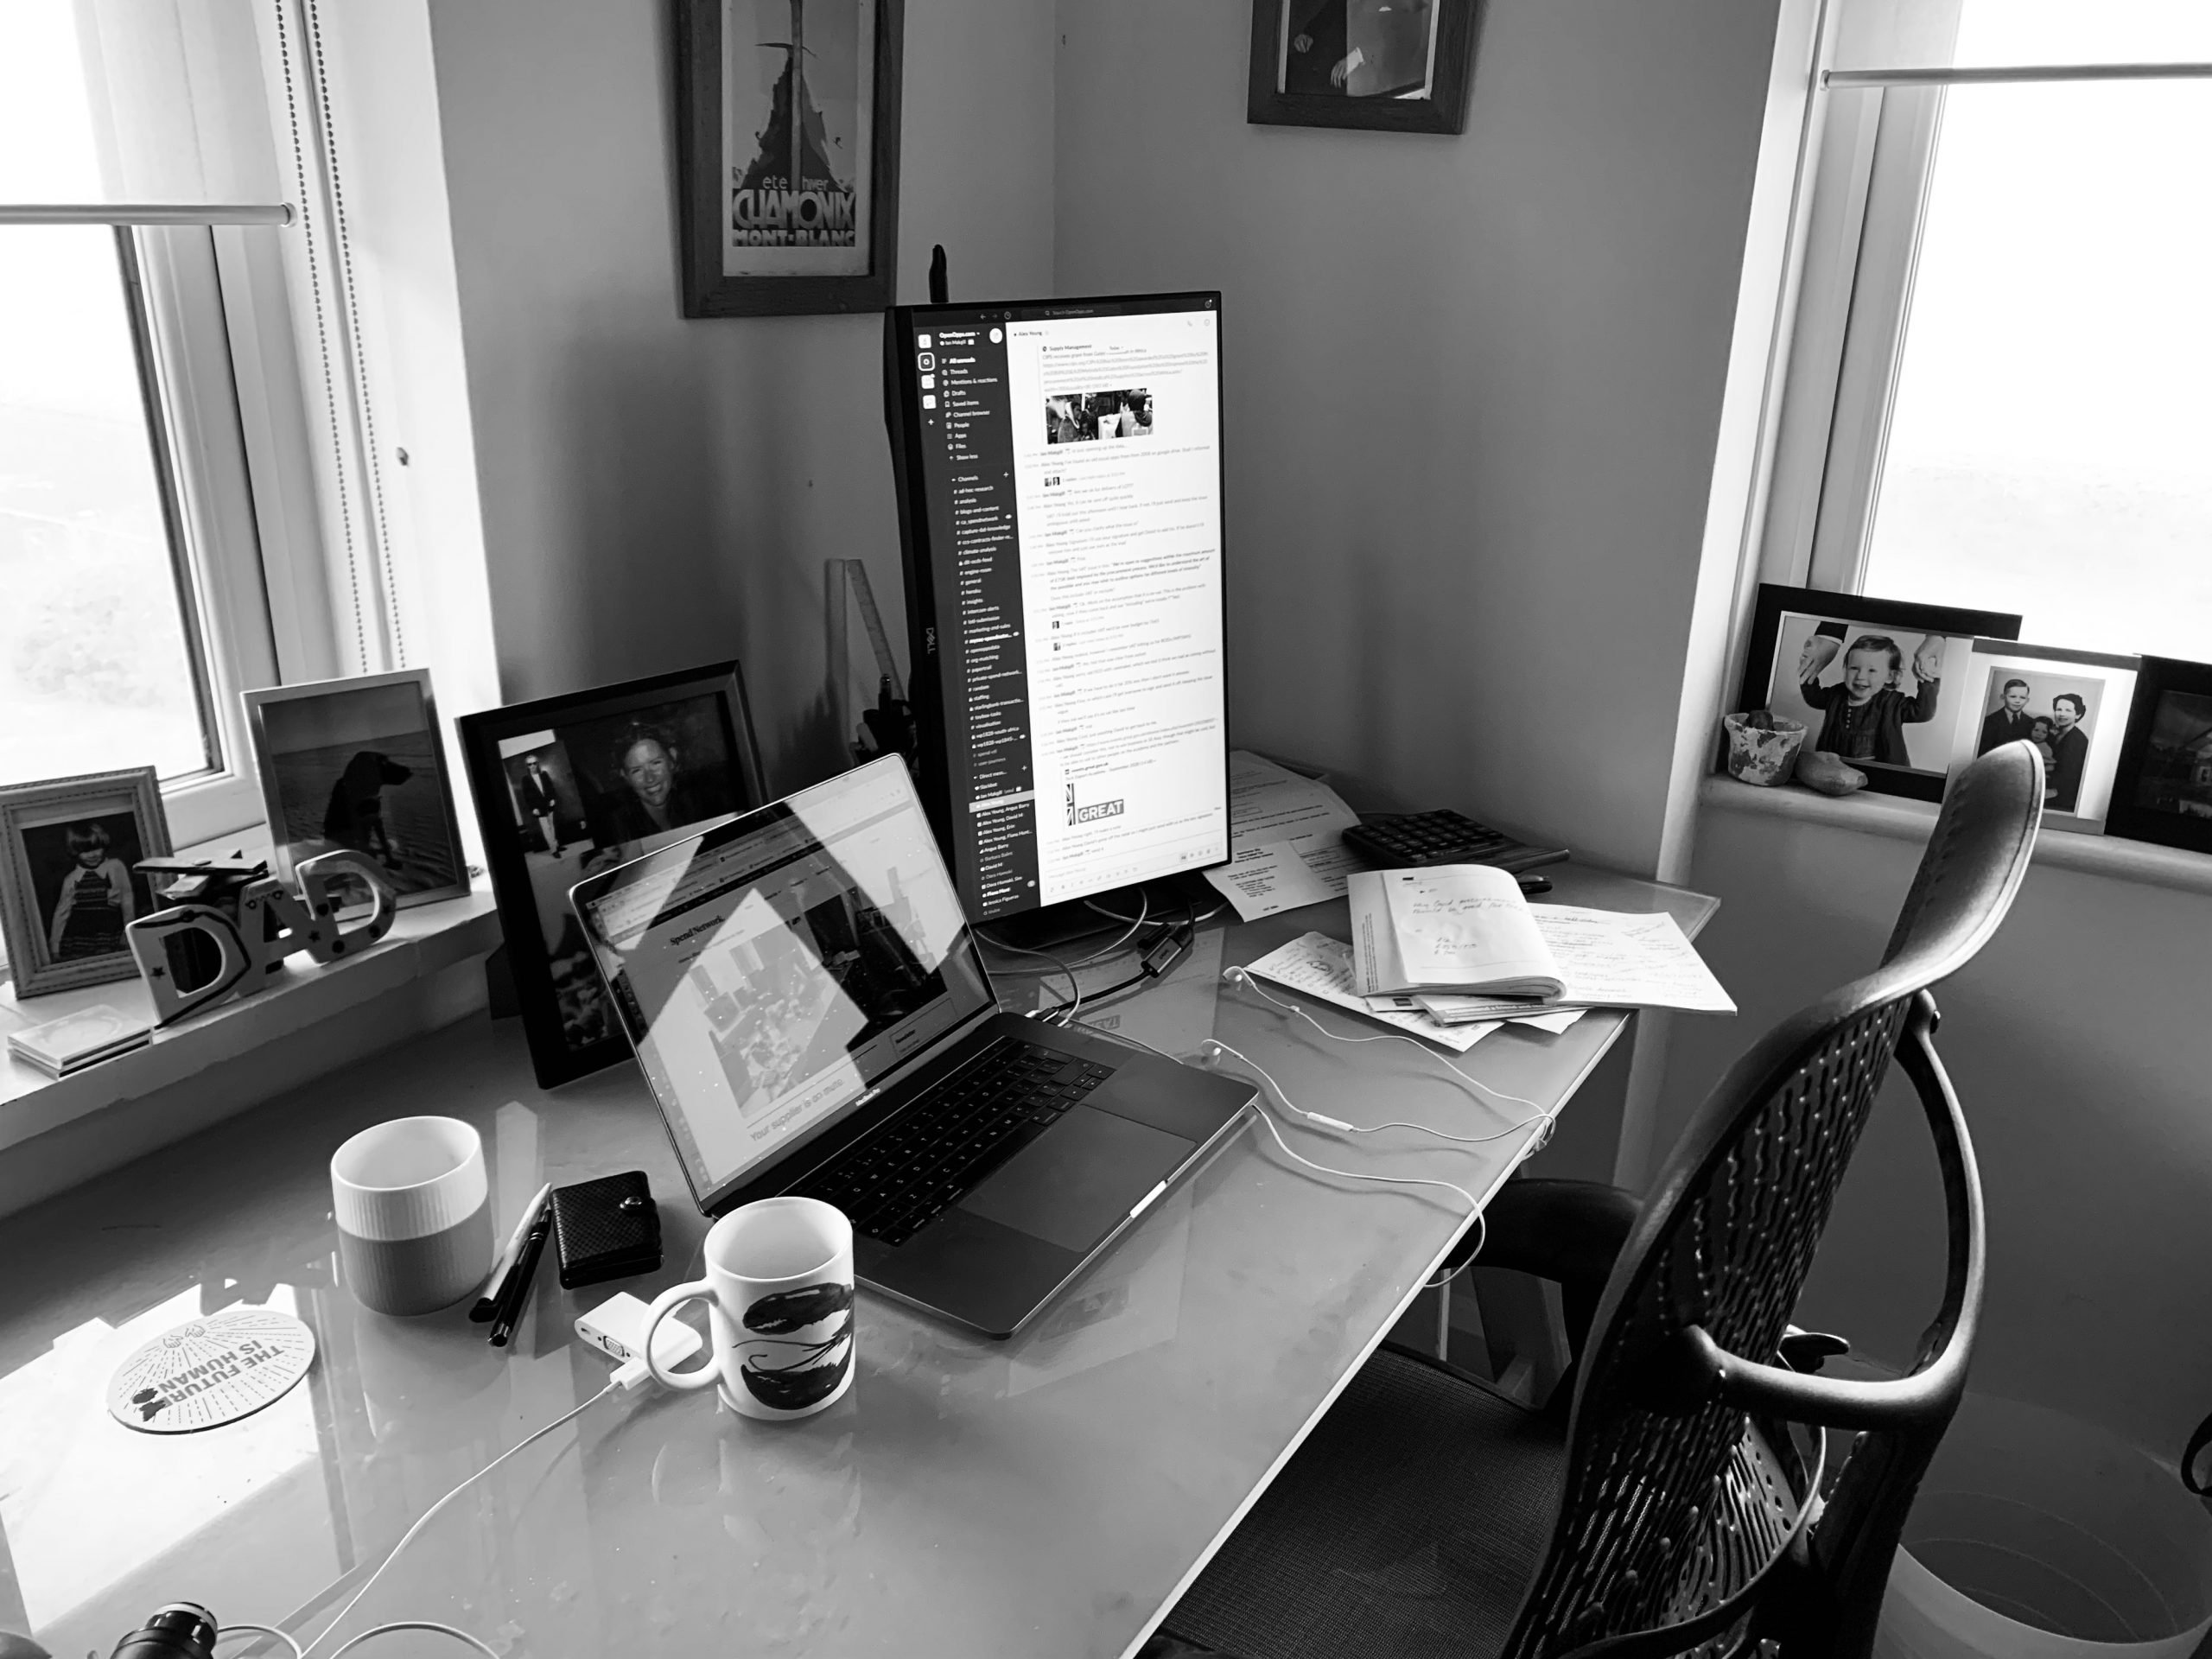 Desk with screens, chair and cups